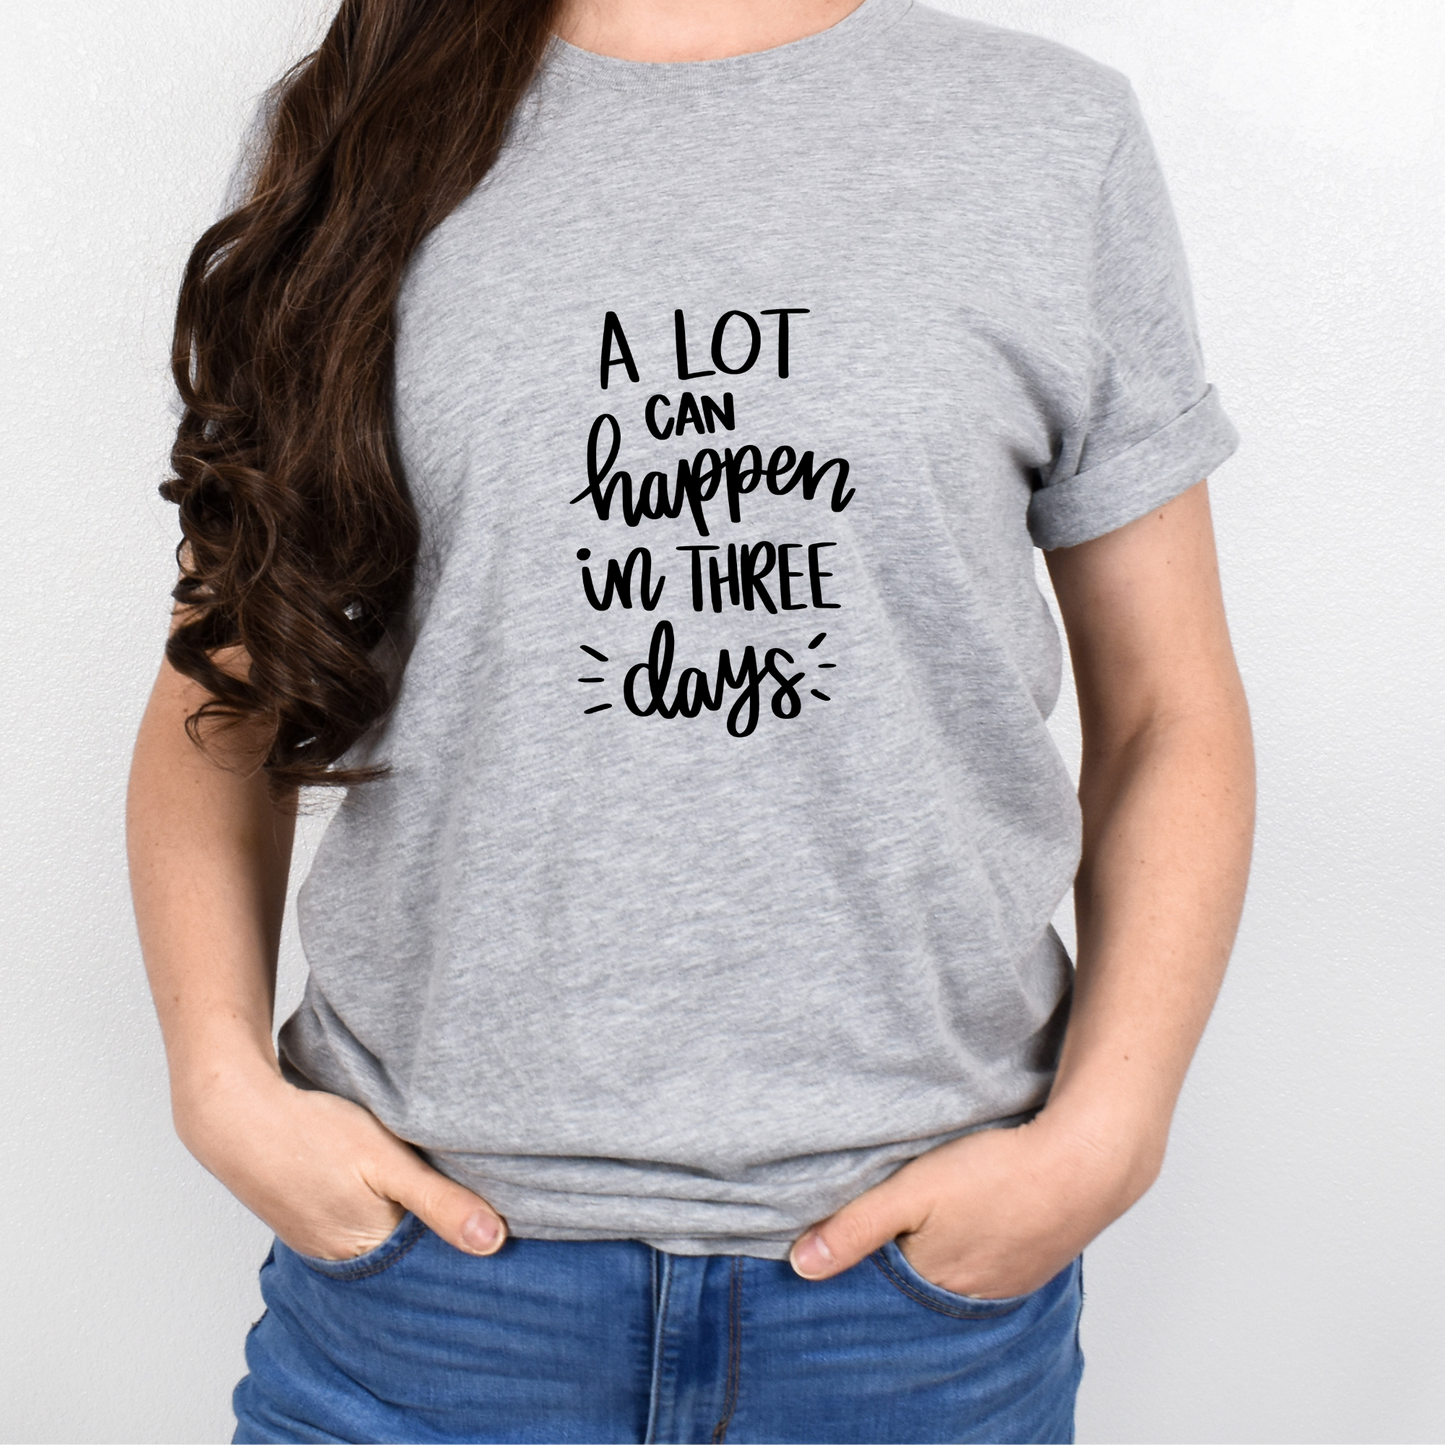 Alot can happen in 3 days Graphic Shirt